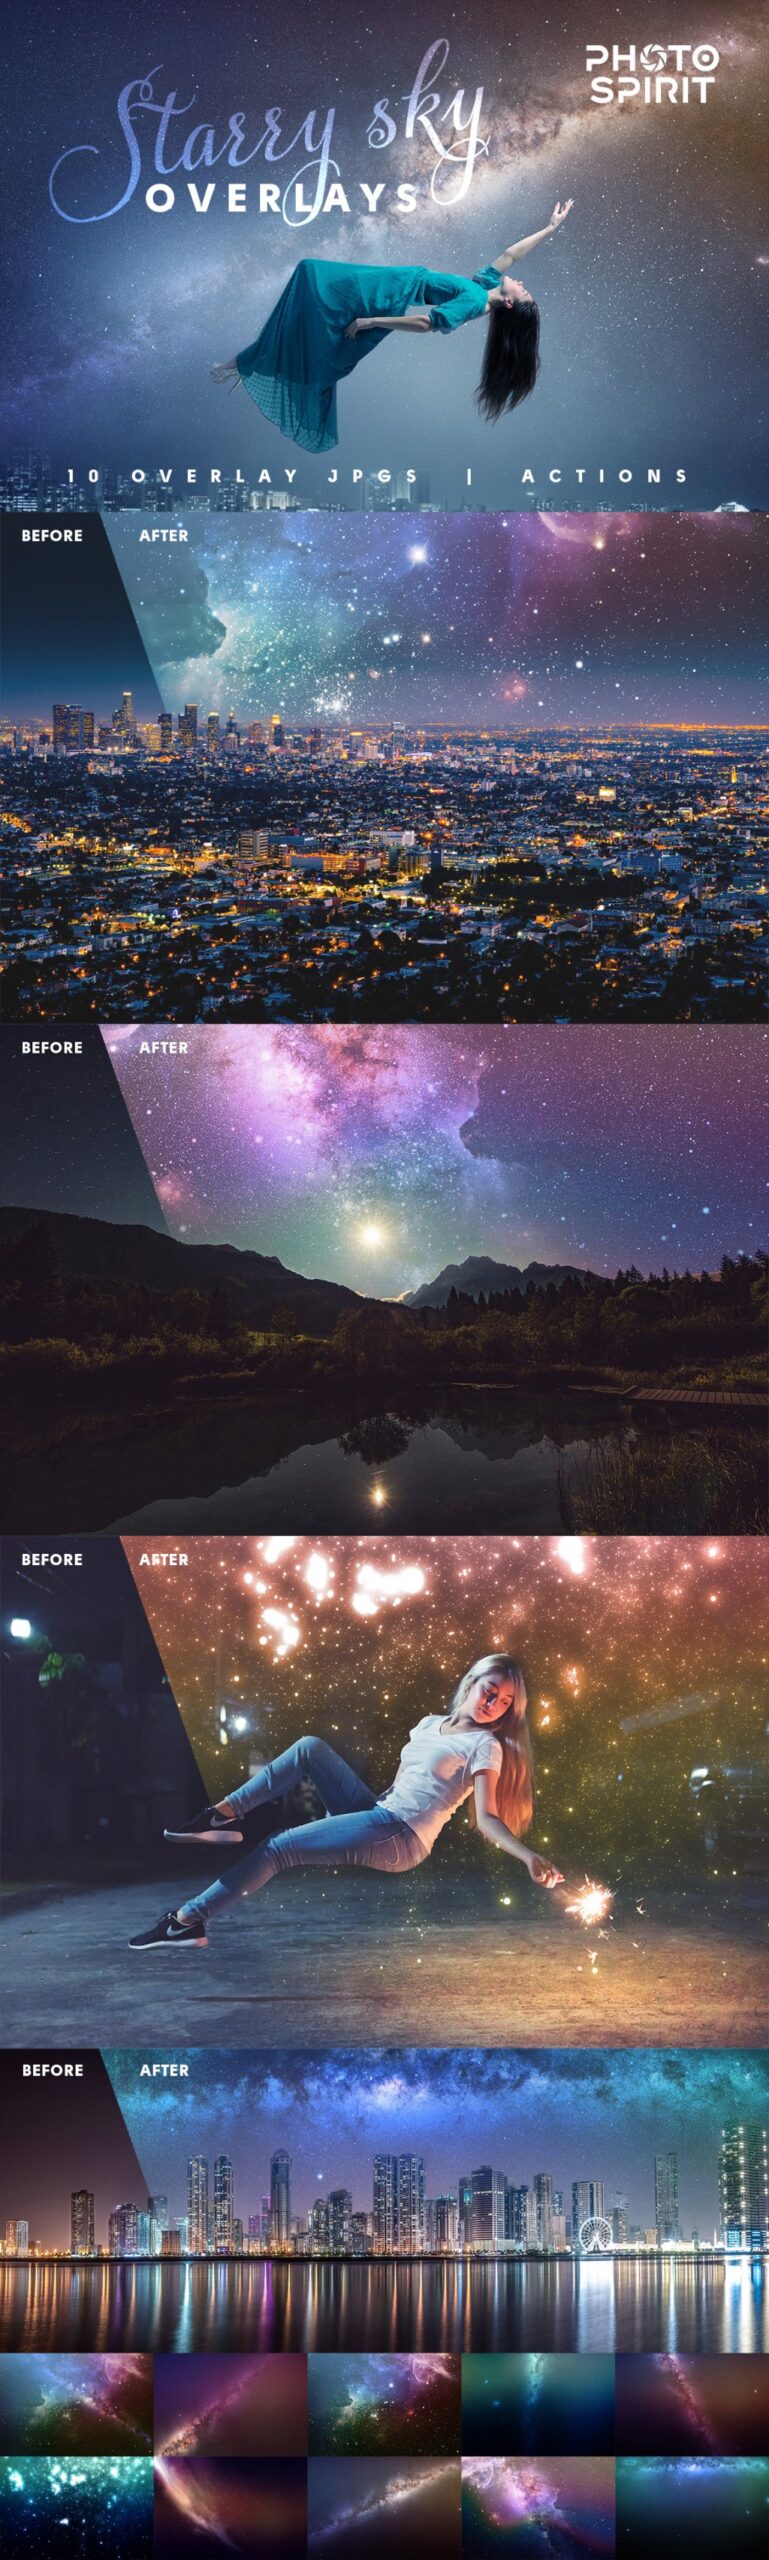 Starry Sky Overlays And Actions